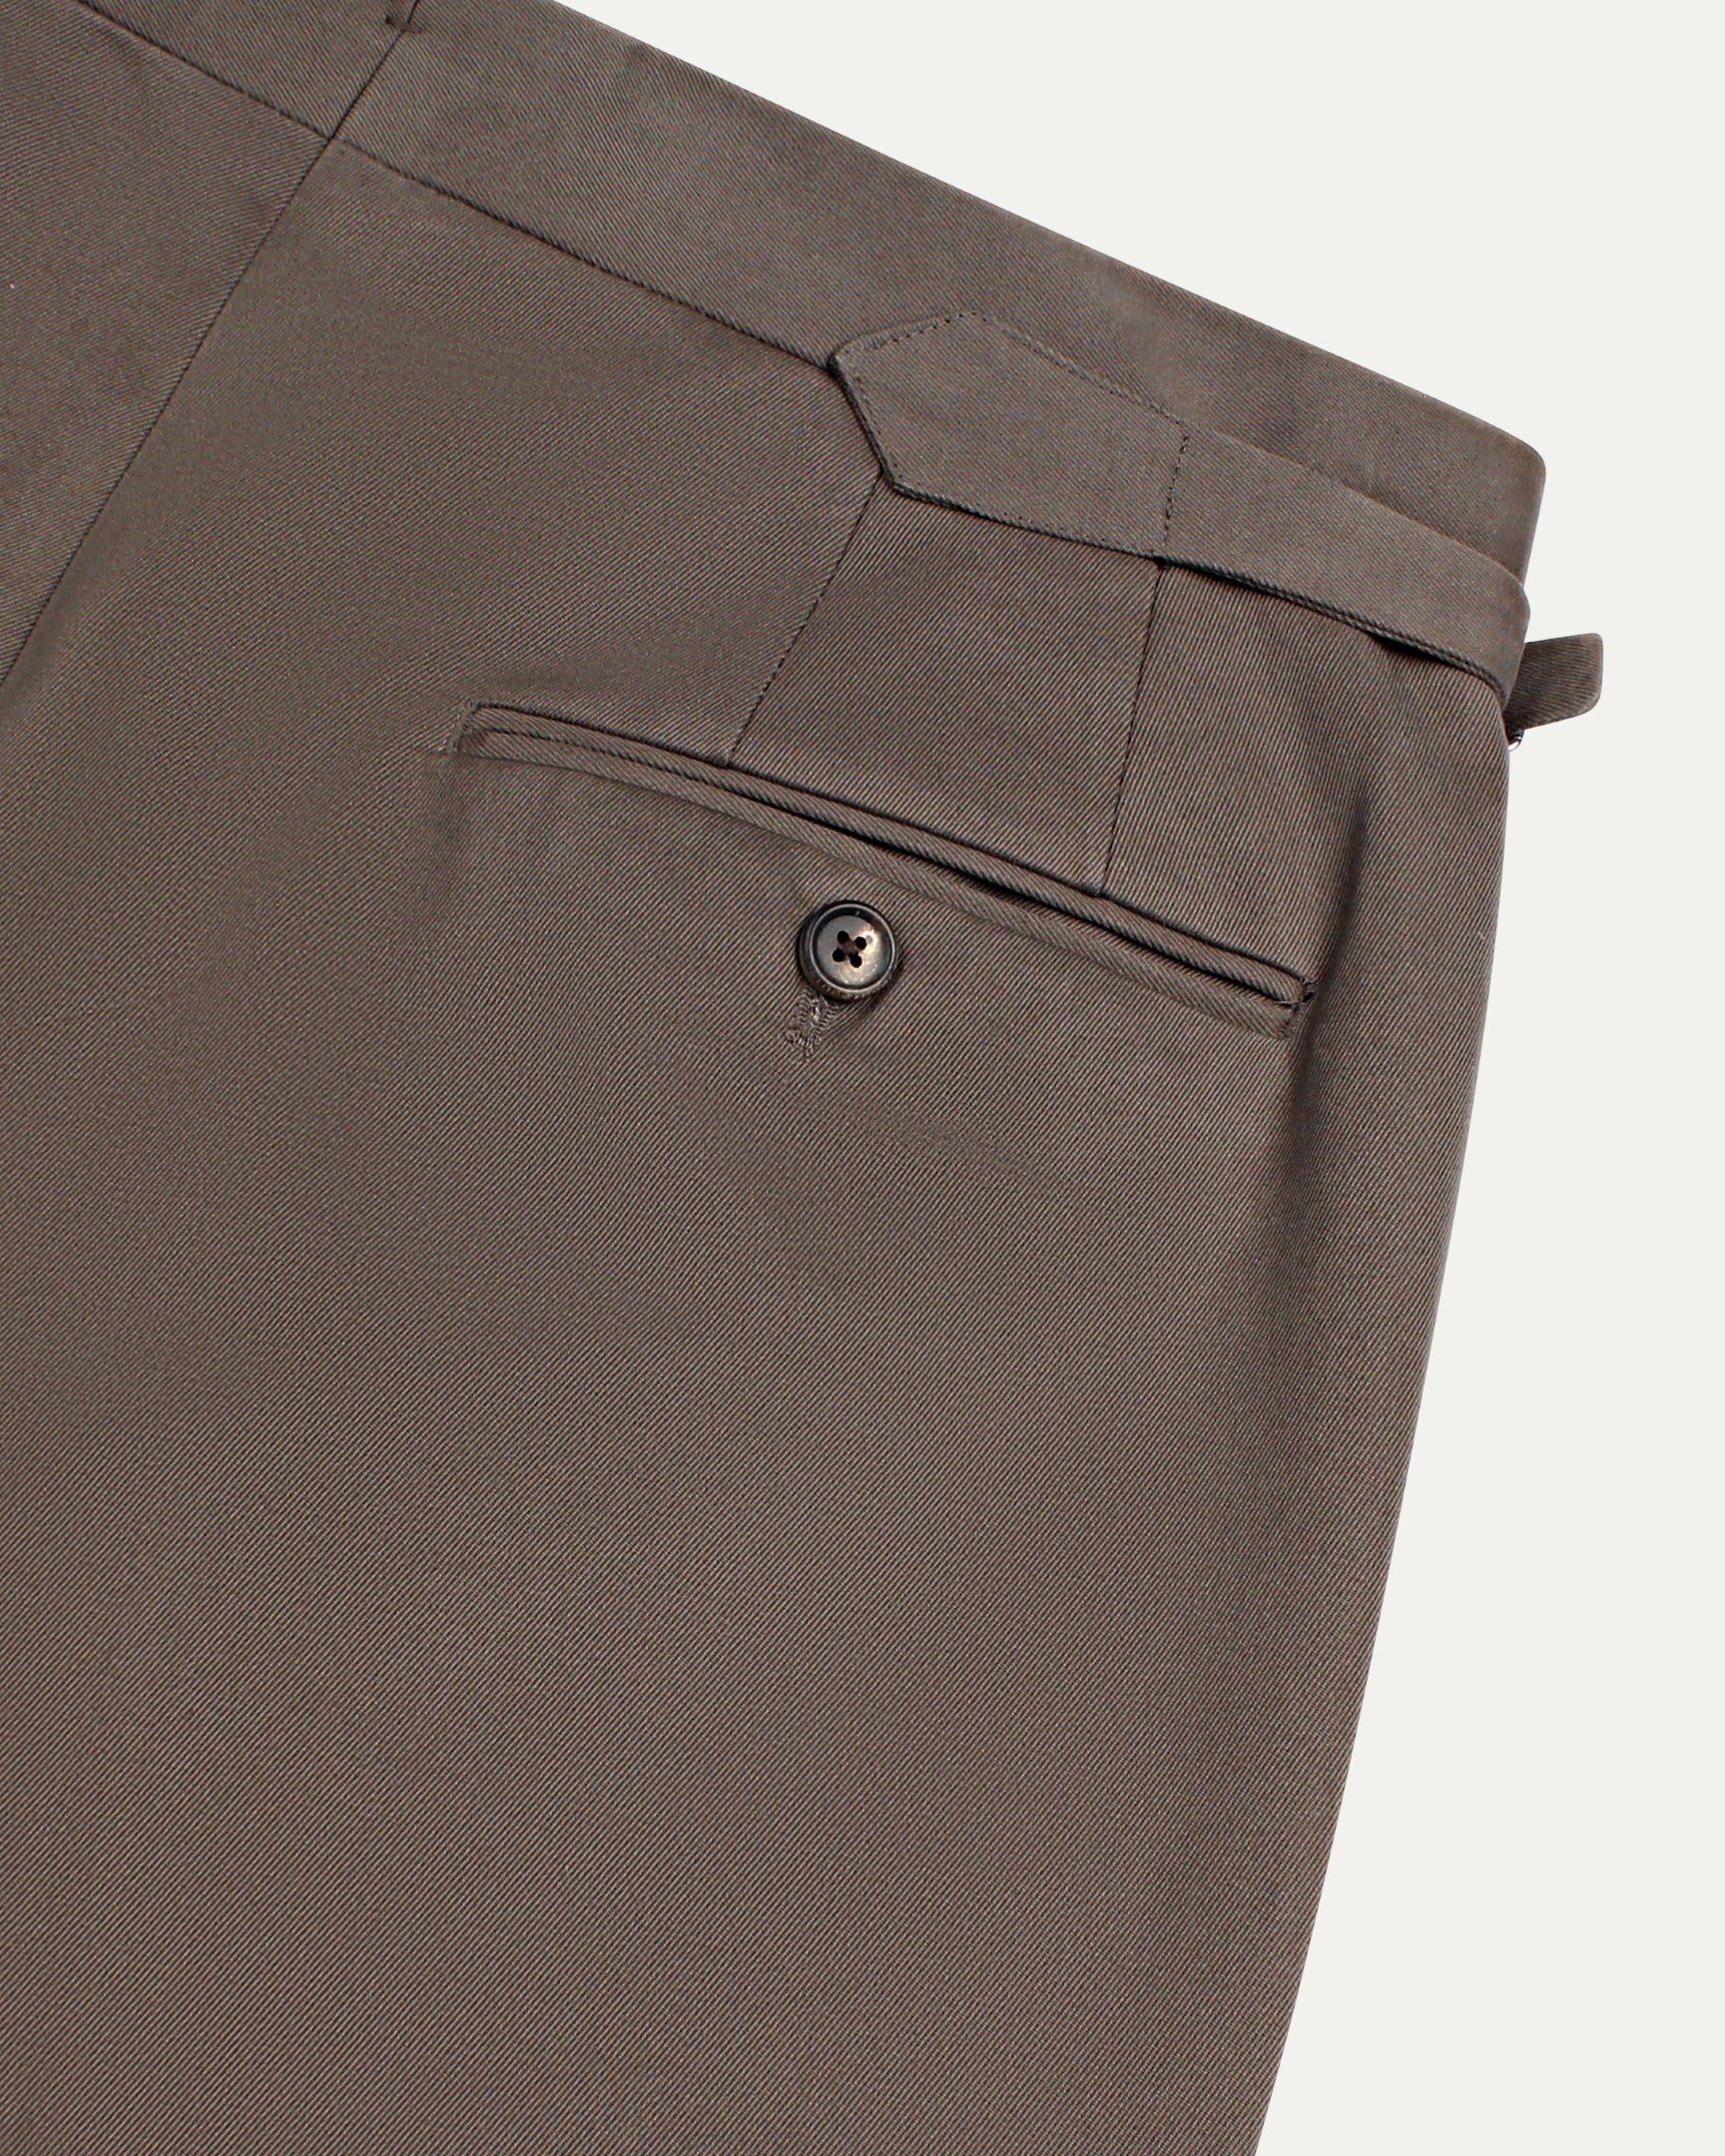 Made-To-Order Trousers in Tobacco Cotton Drill